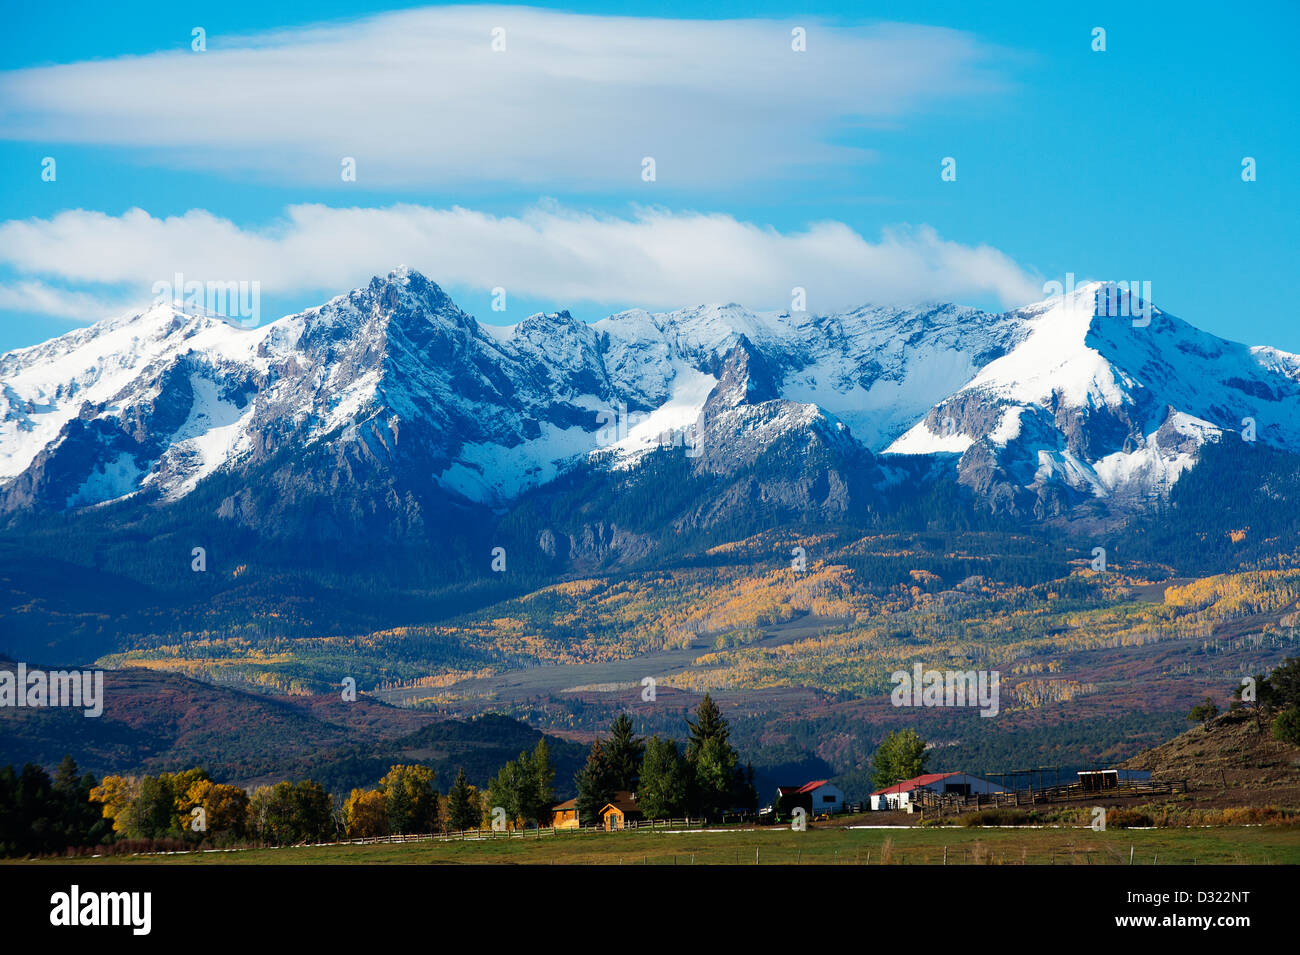 Snowy mountains overlooking rural landscape Stock Photo